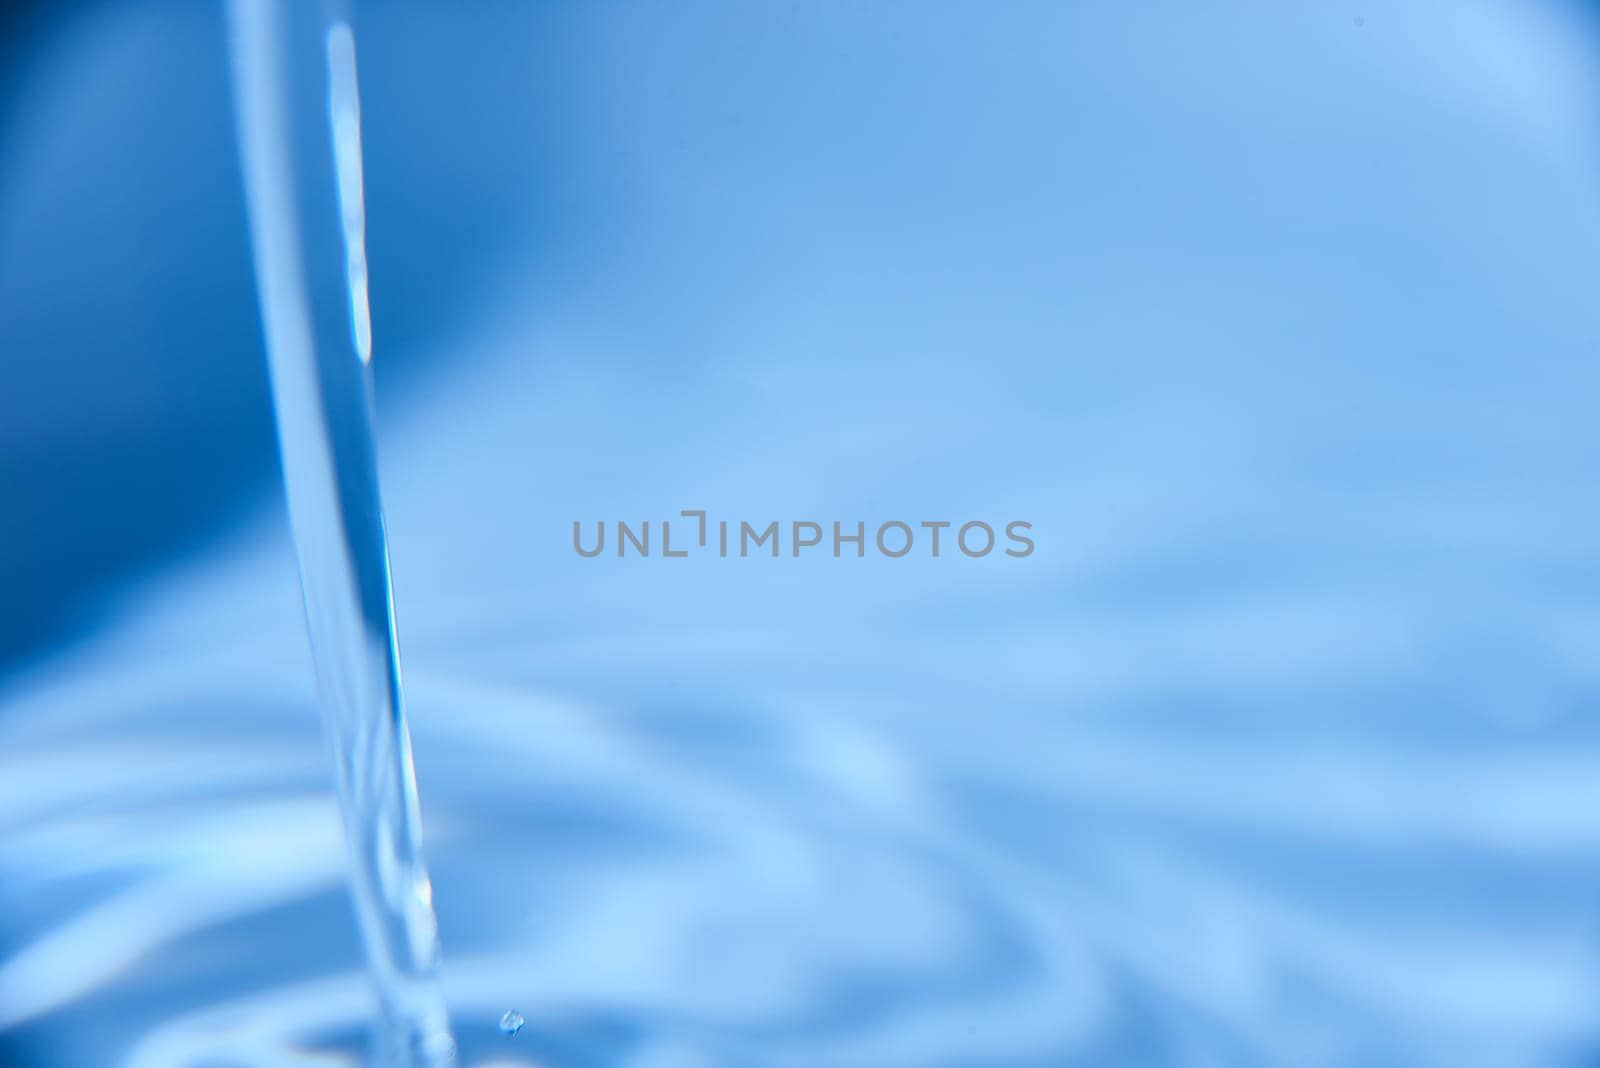 158.One or more drops of water splashing into waves and undefined shapes. Wallpaper by raul_ruiz